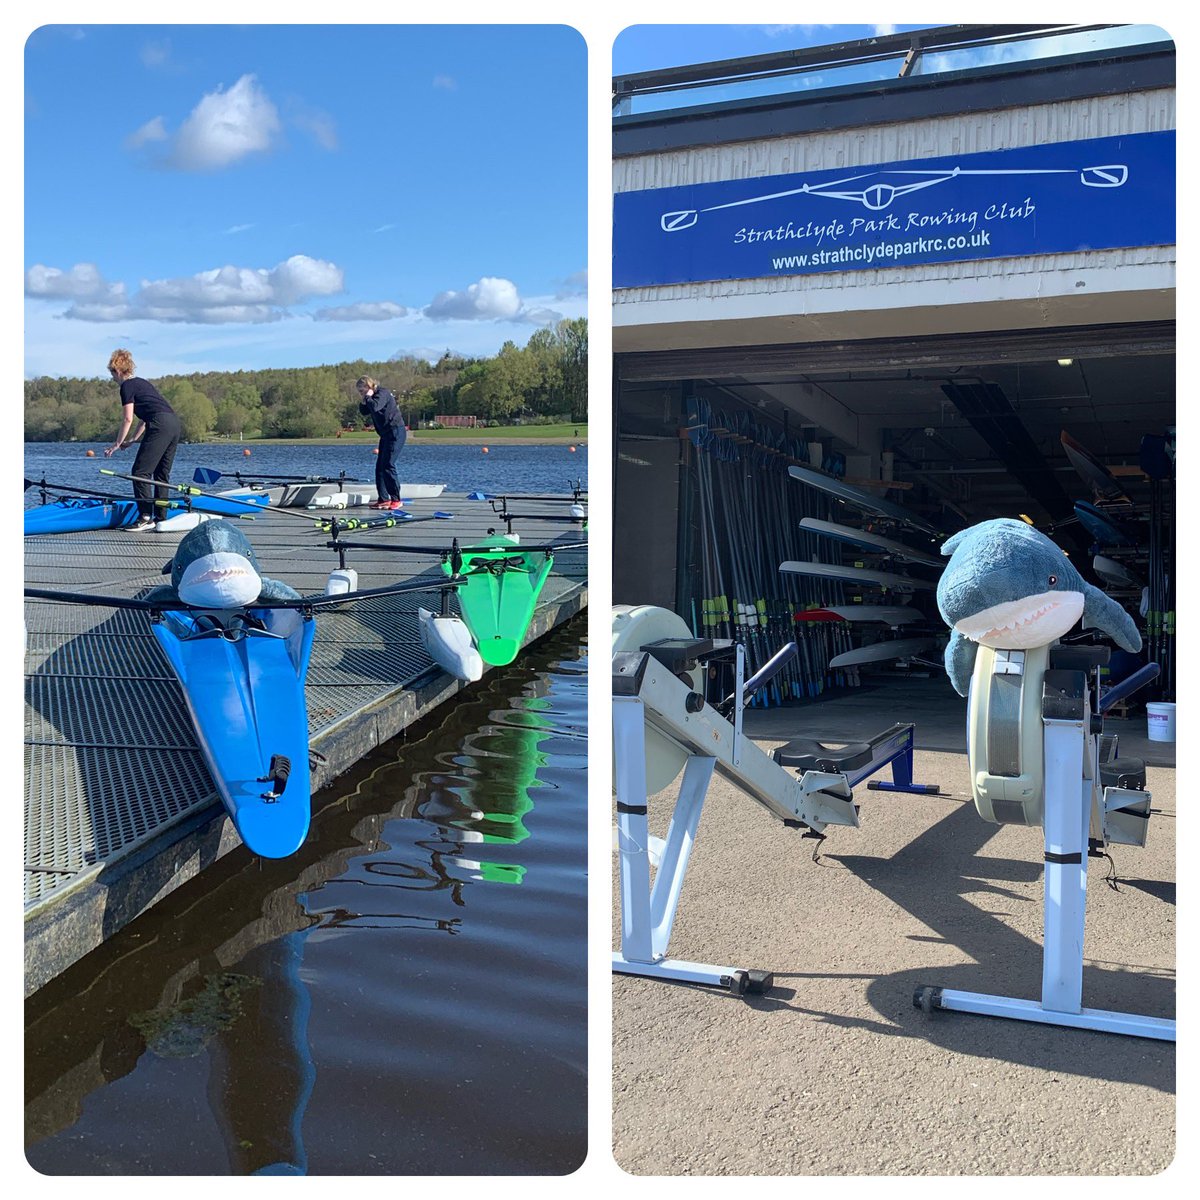 Our newest member of the #CommunityRowing outreach team, the #ParkShark, is ready to welcome the first of our primary school groups this morning @SP_RC1 @NLActiveSchools